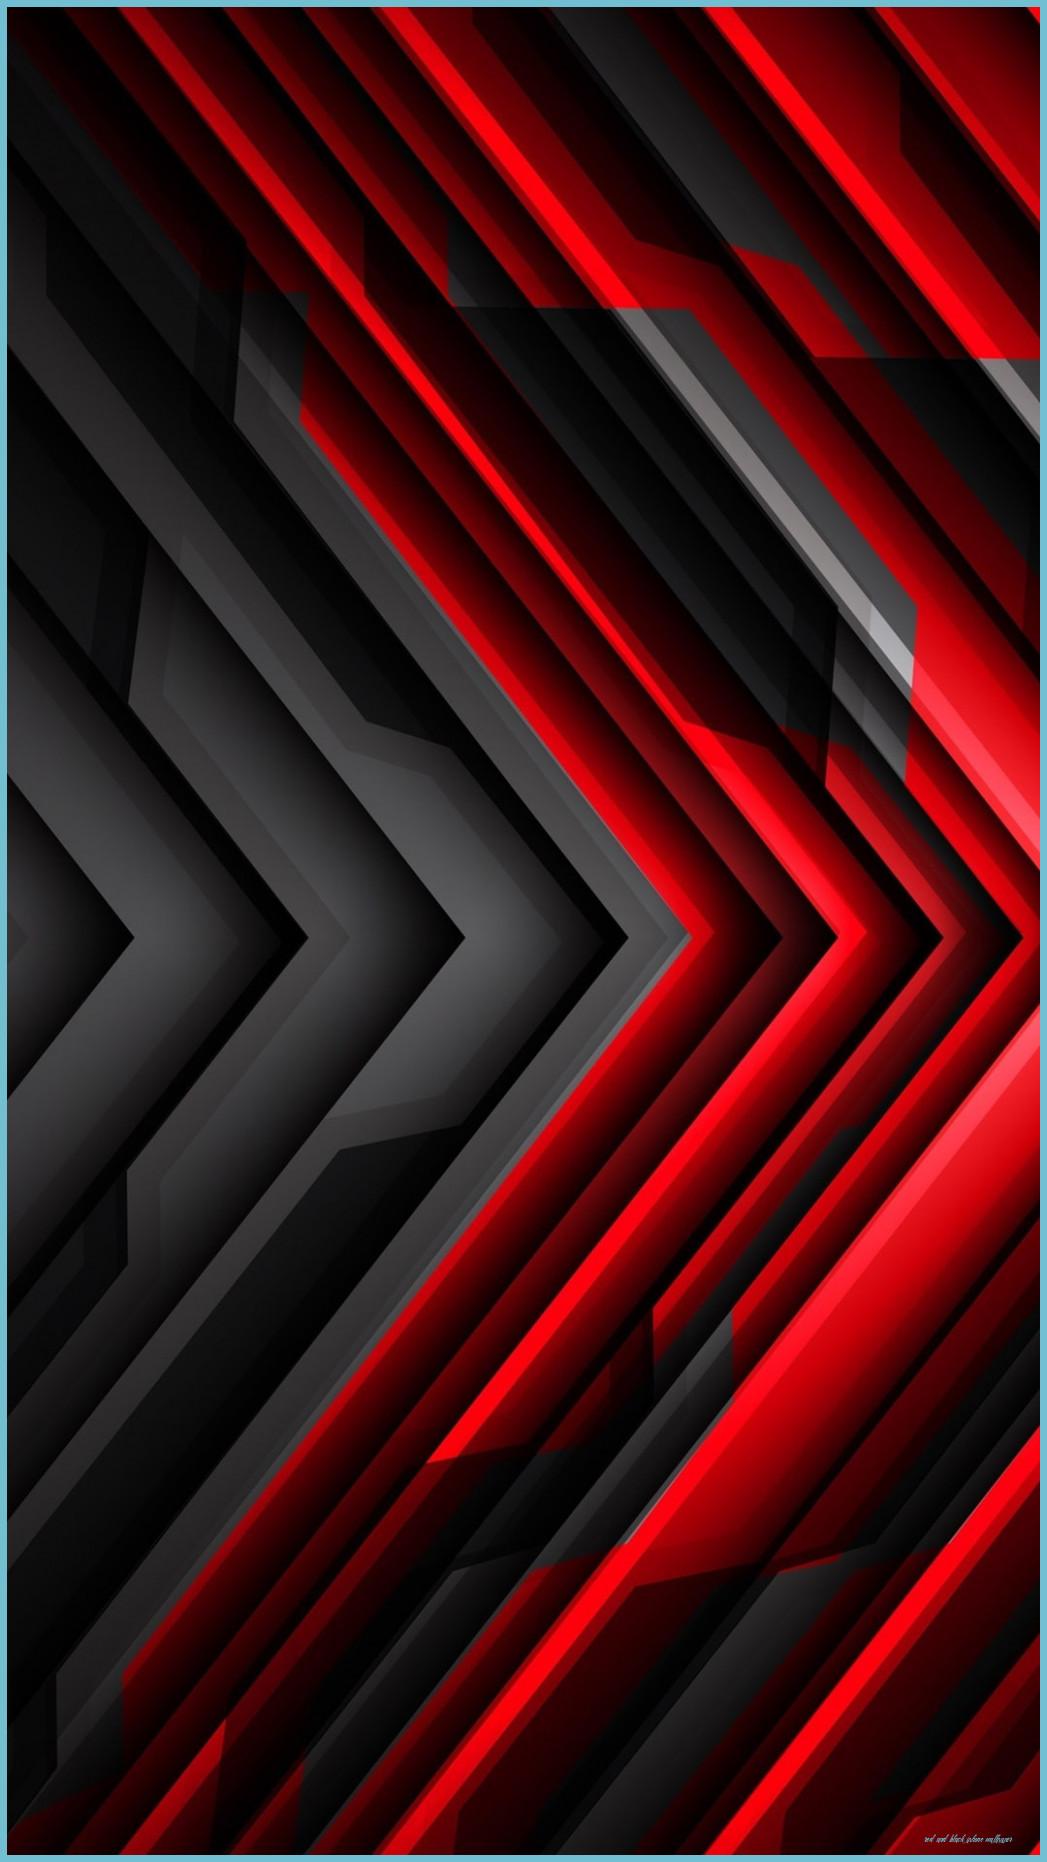 Total 206+ imagen red and black background iphone - Thcshoanghoatham ...